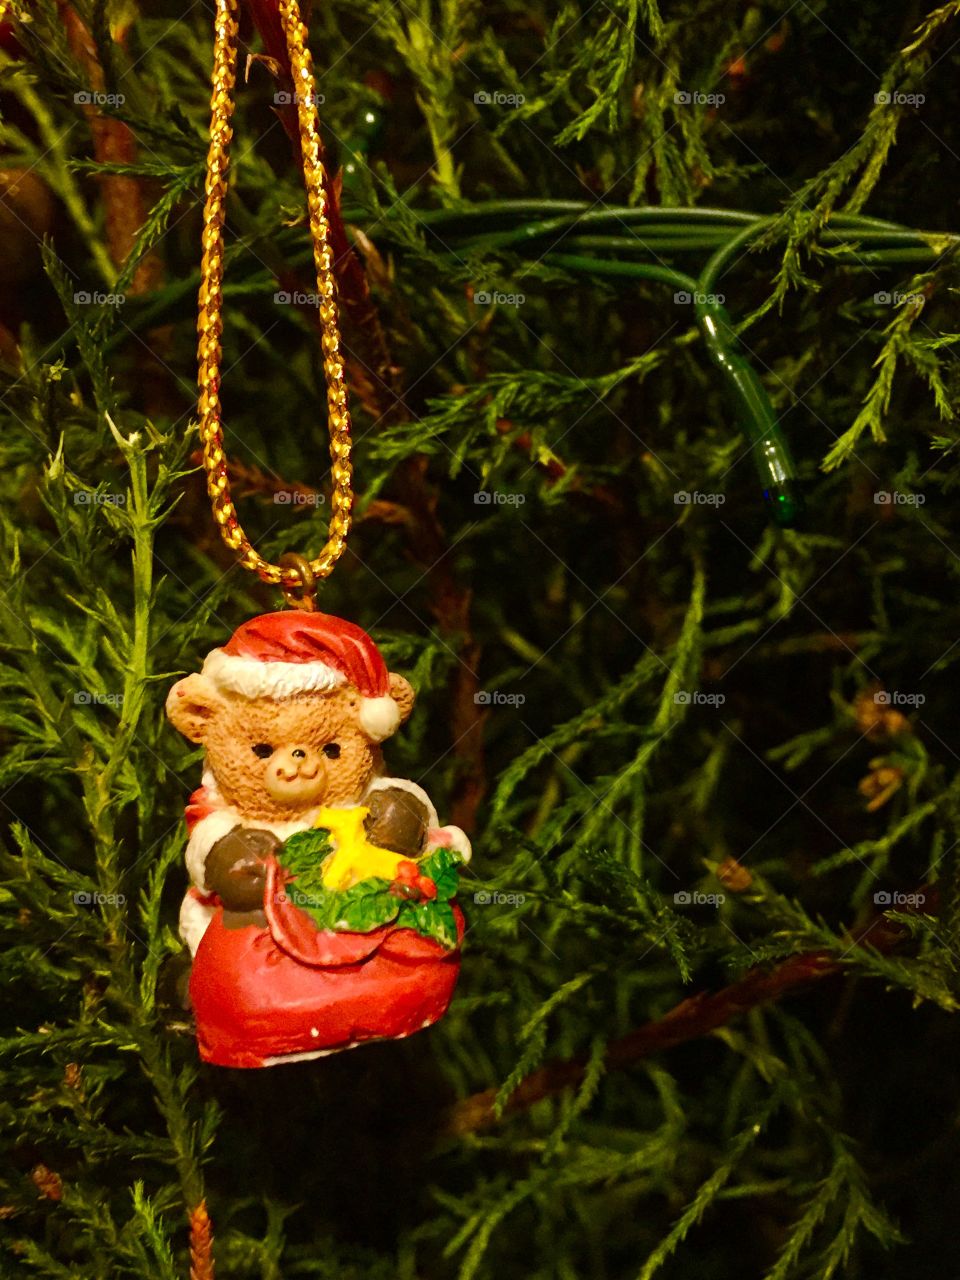 Christmas ornament of a bear hanging from a tree